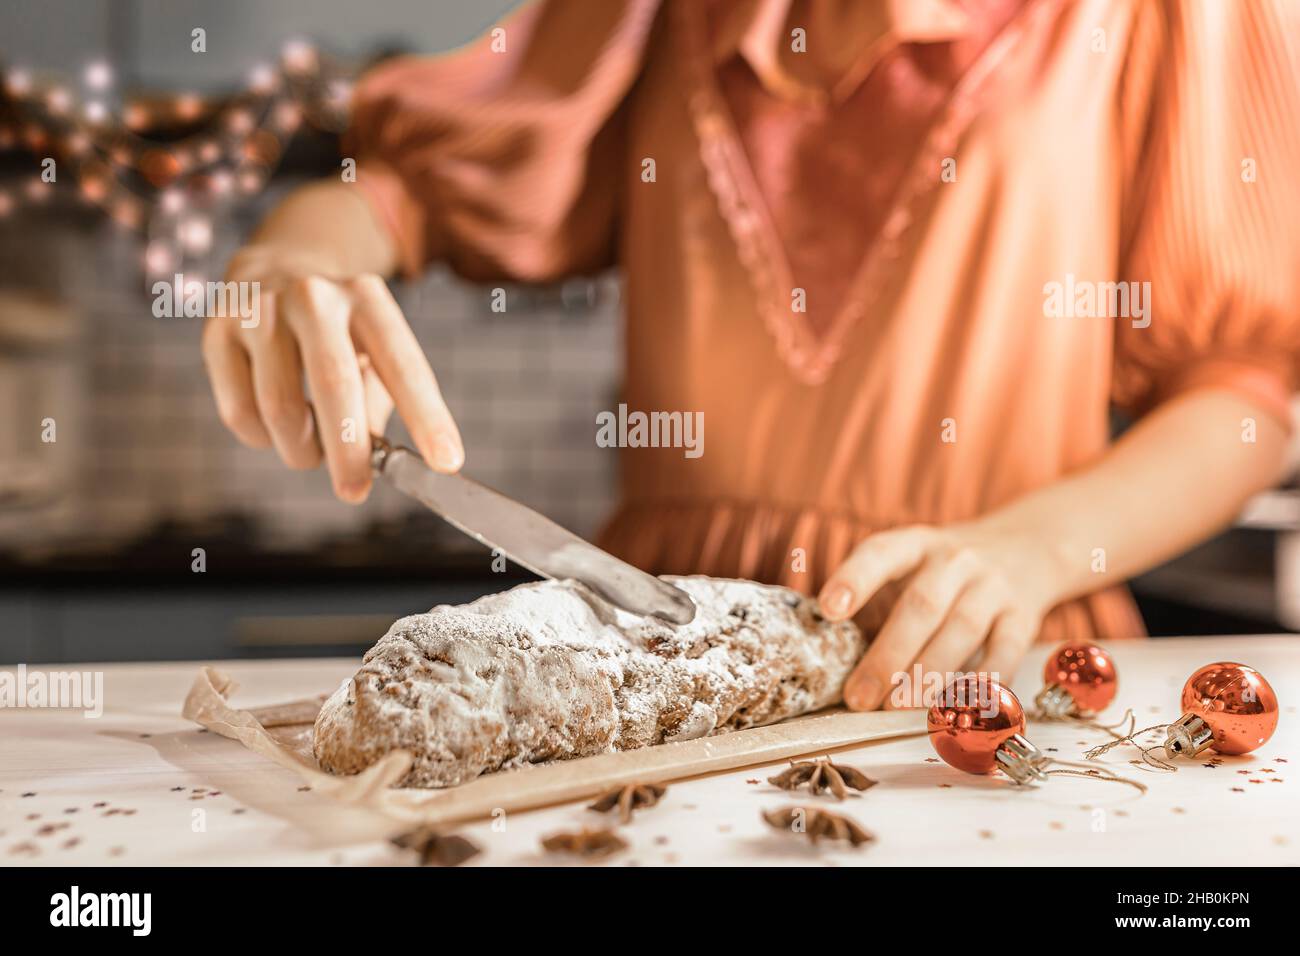 cut festive traditional German Stollen pie into pieces. girl in festive dress cuts stollen with knife in kitchen on christmas eve Stock Photo